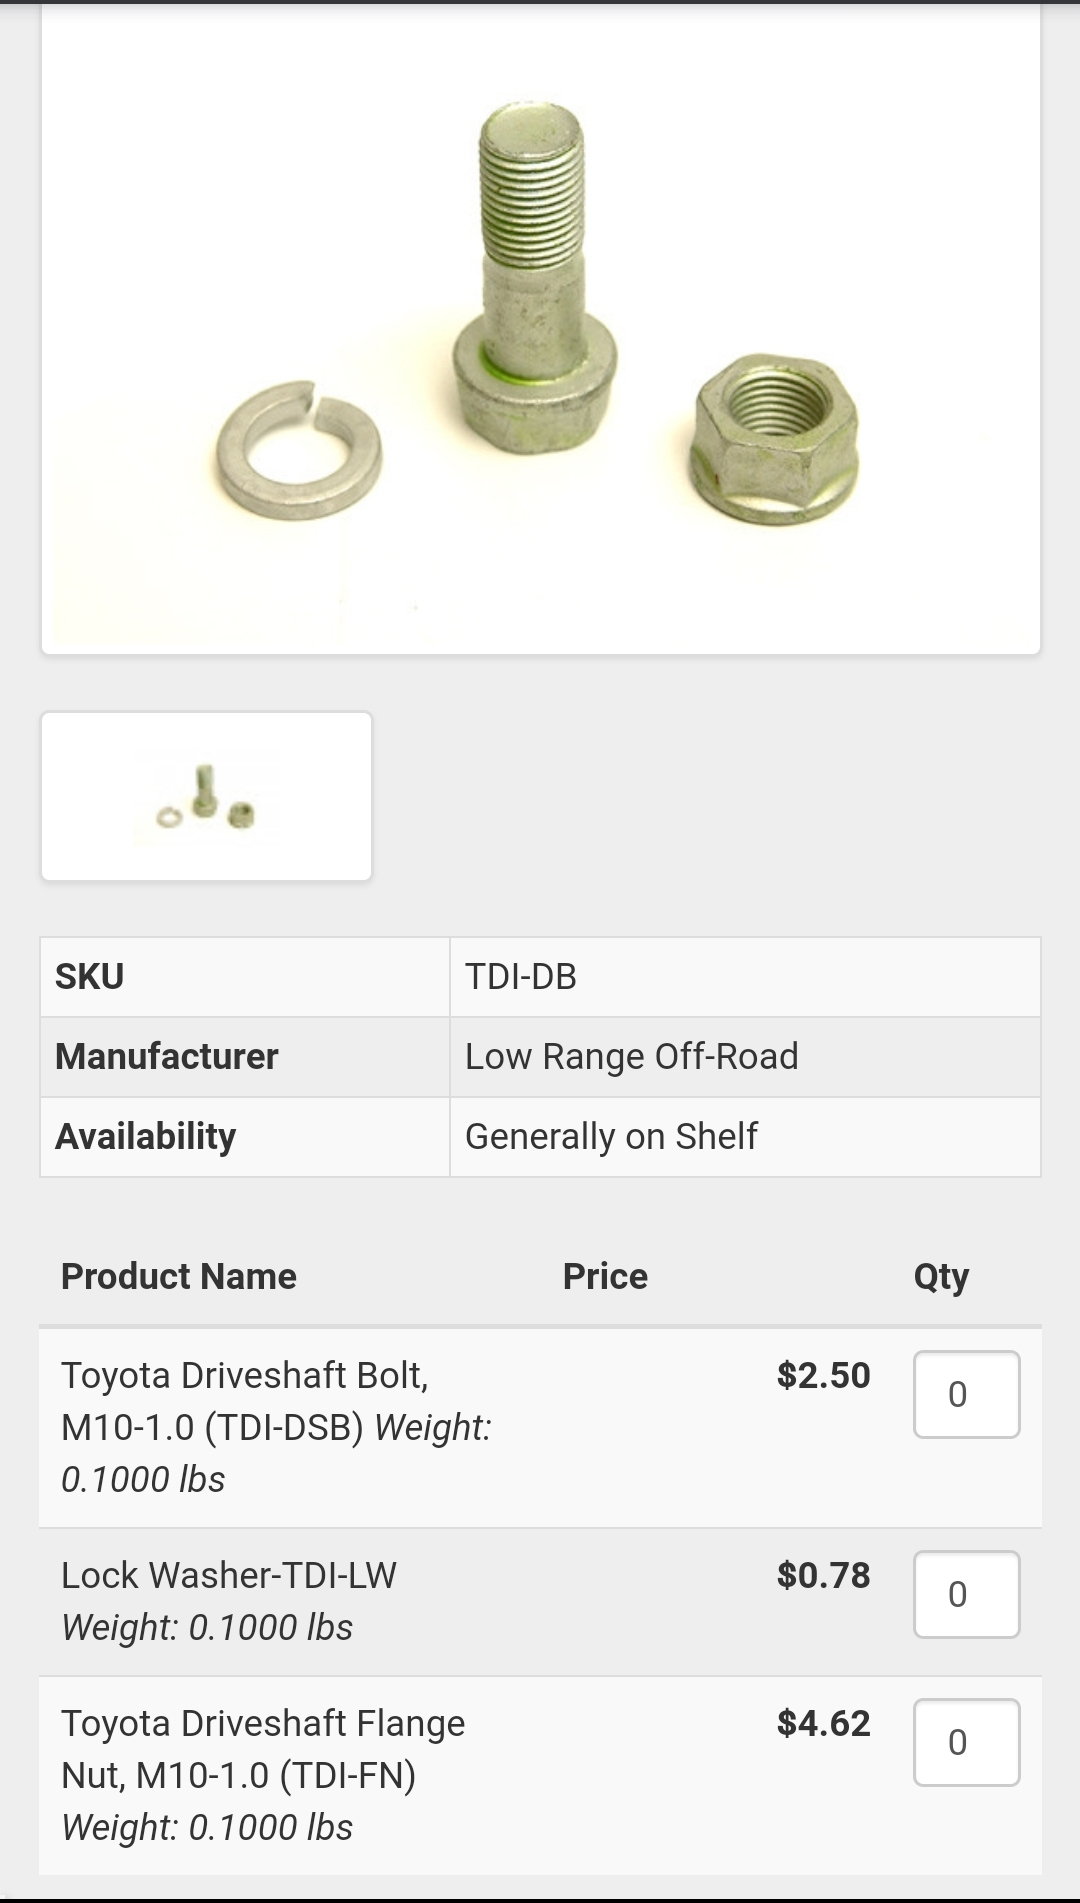 Japanese Manufacturered and Bolts Drive Shaft Hardware 10mm Bolts with 14mm Head Washers 4 Pack Includes Nuts Fits 79-95 Toyota Truck and 4Runner 